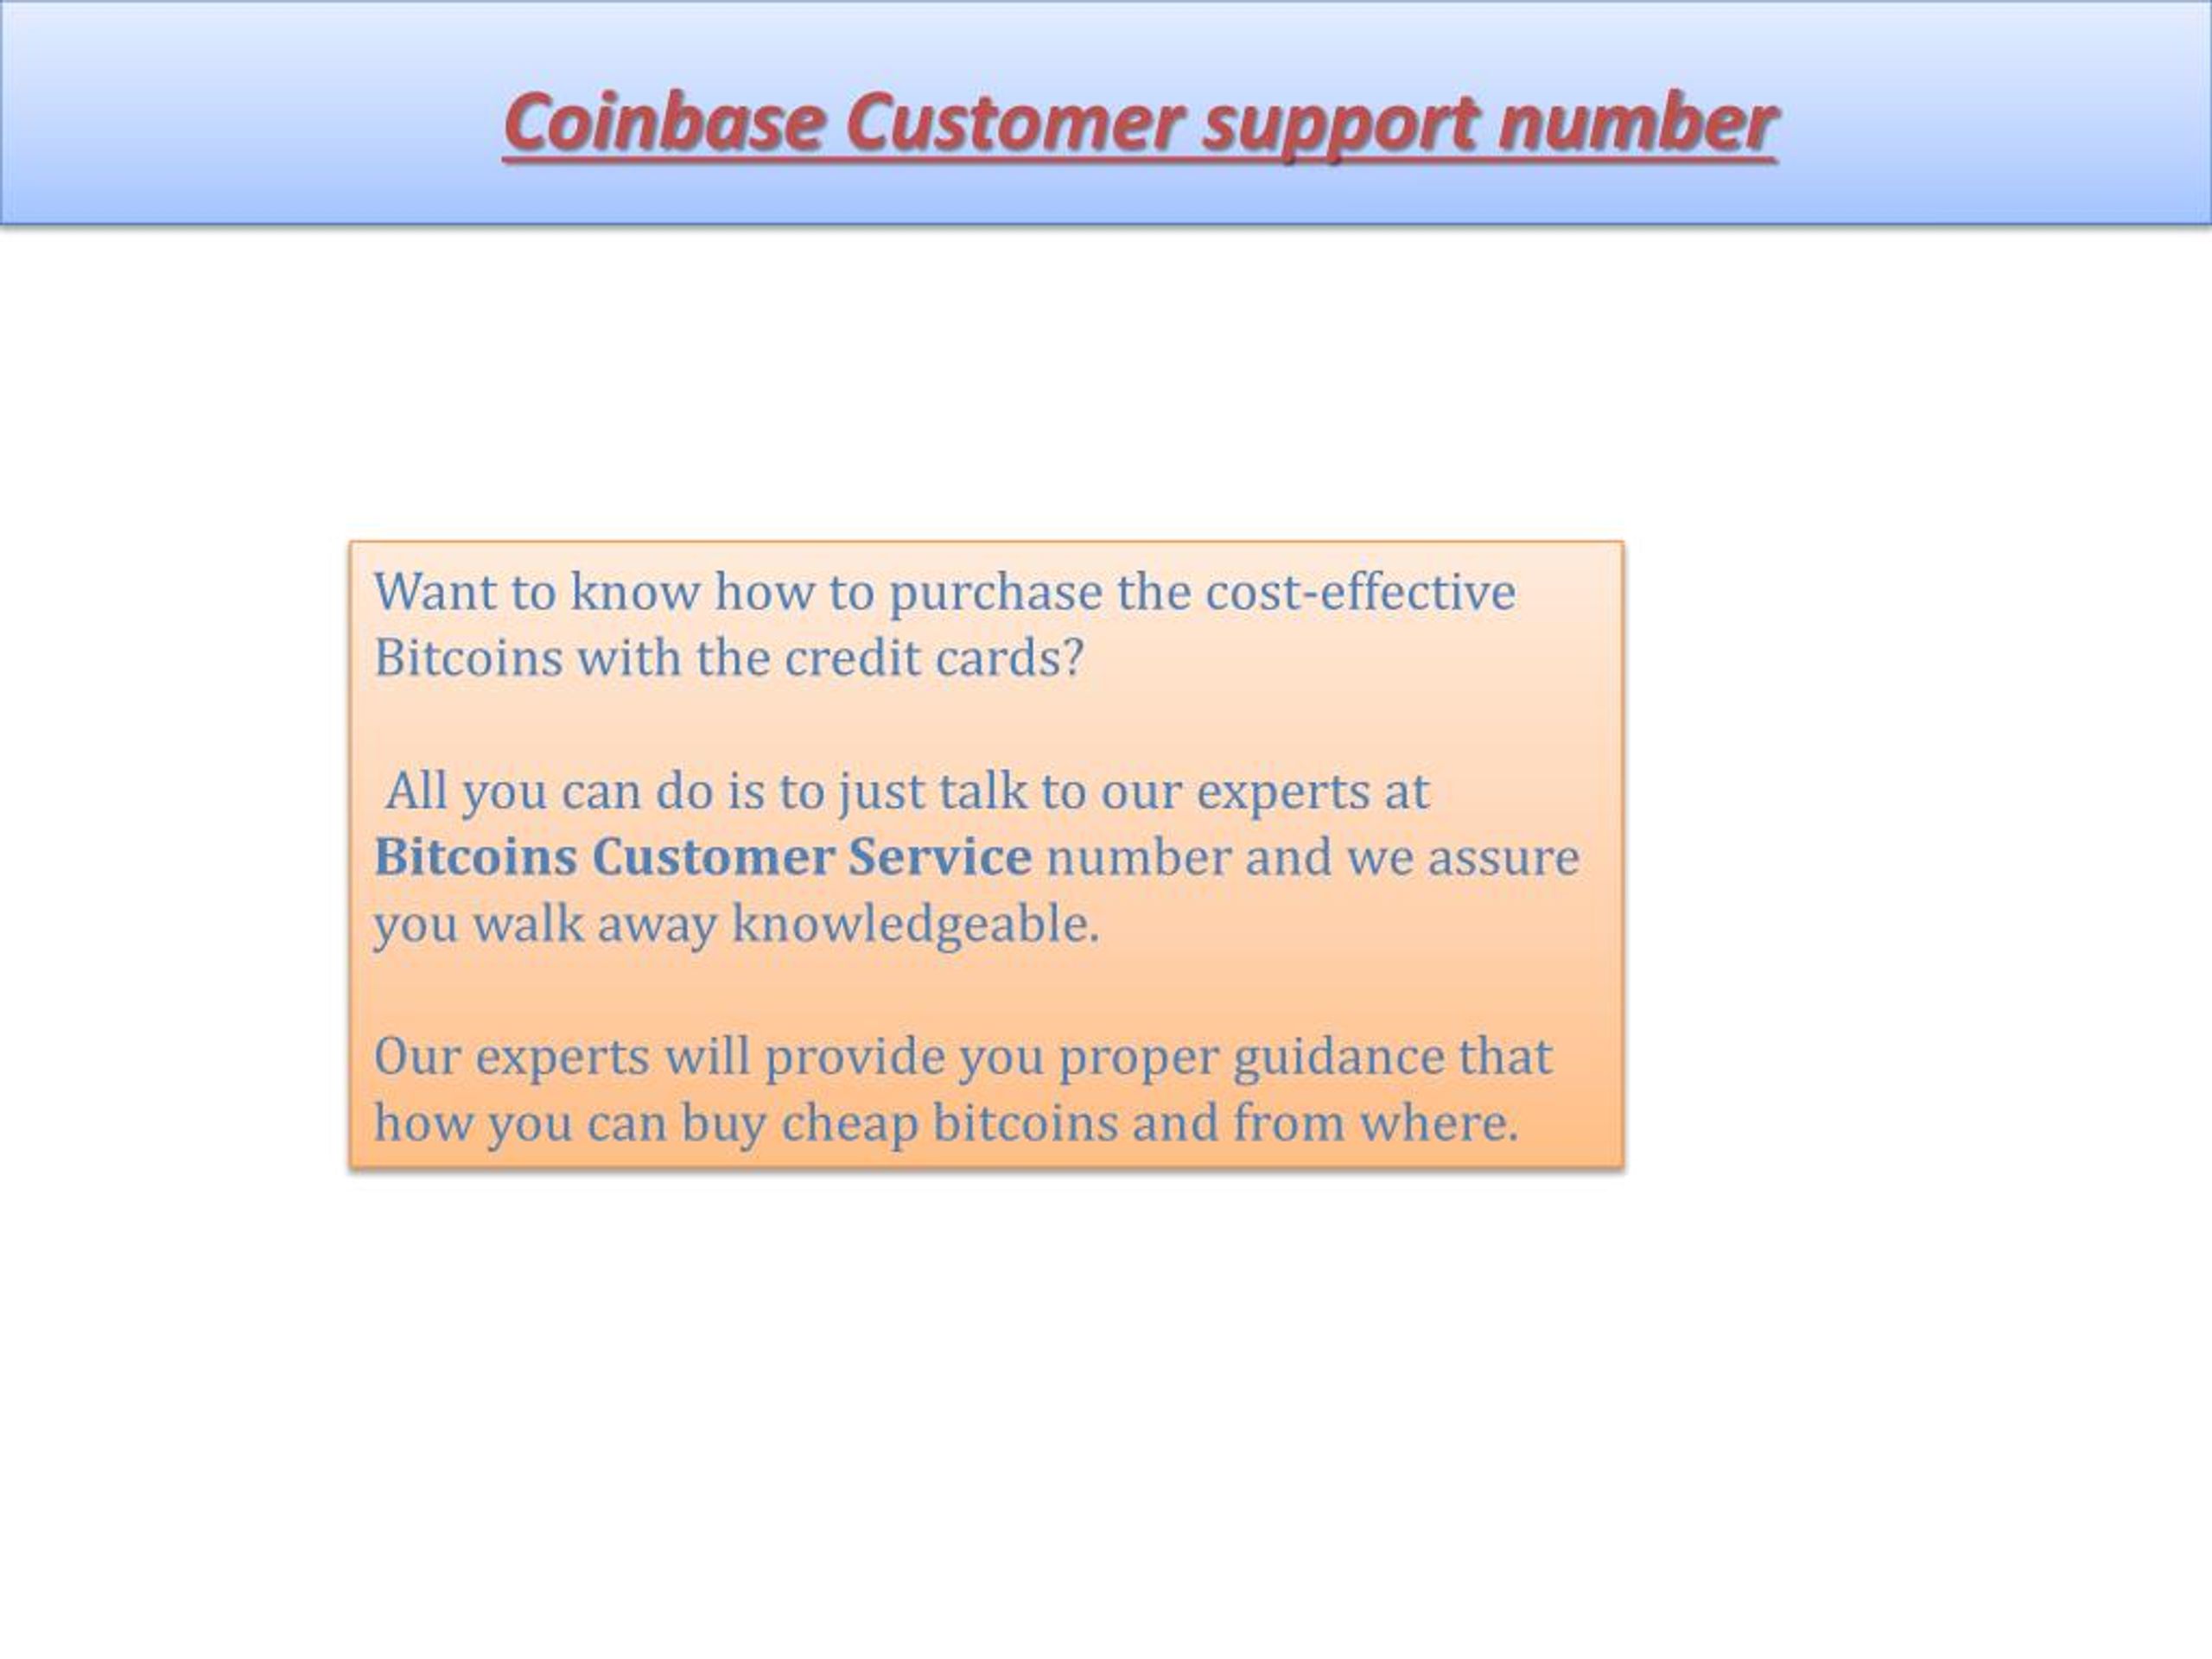 PPT - Coinbase Customer Support Number PowerPoint ...